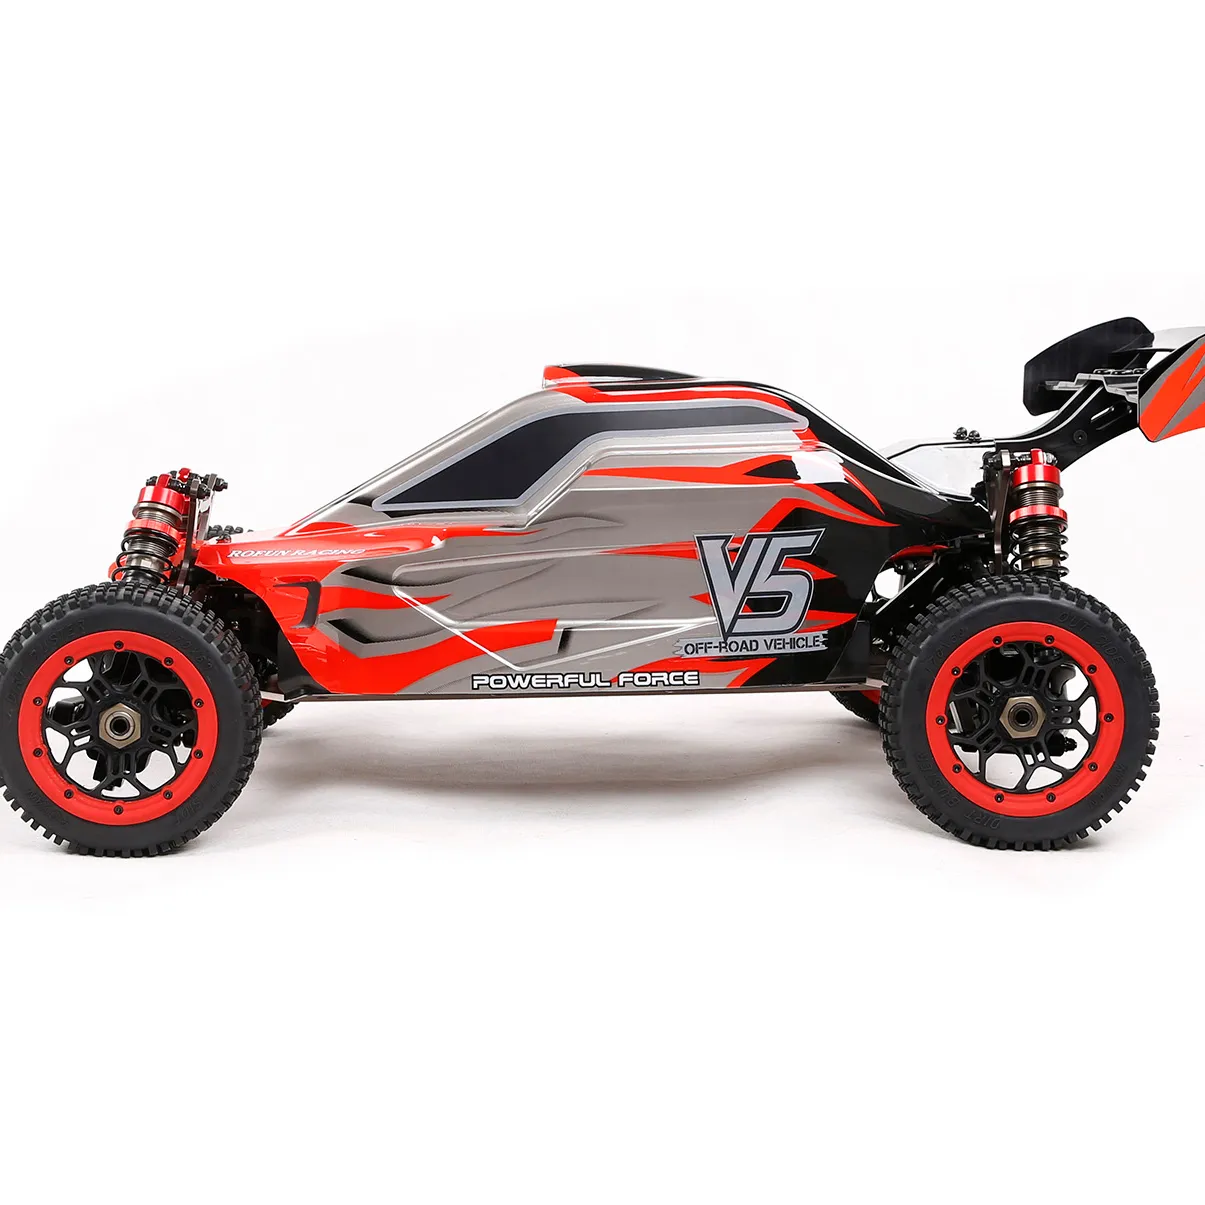 1/5 2.4G Brushless Engine 4WD Drift Radio Racing Car Toys High Speed RC Remote Control Car 100 km Speed gtr 1 pice